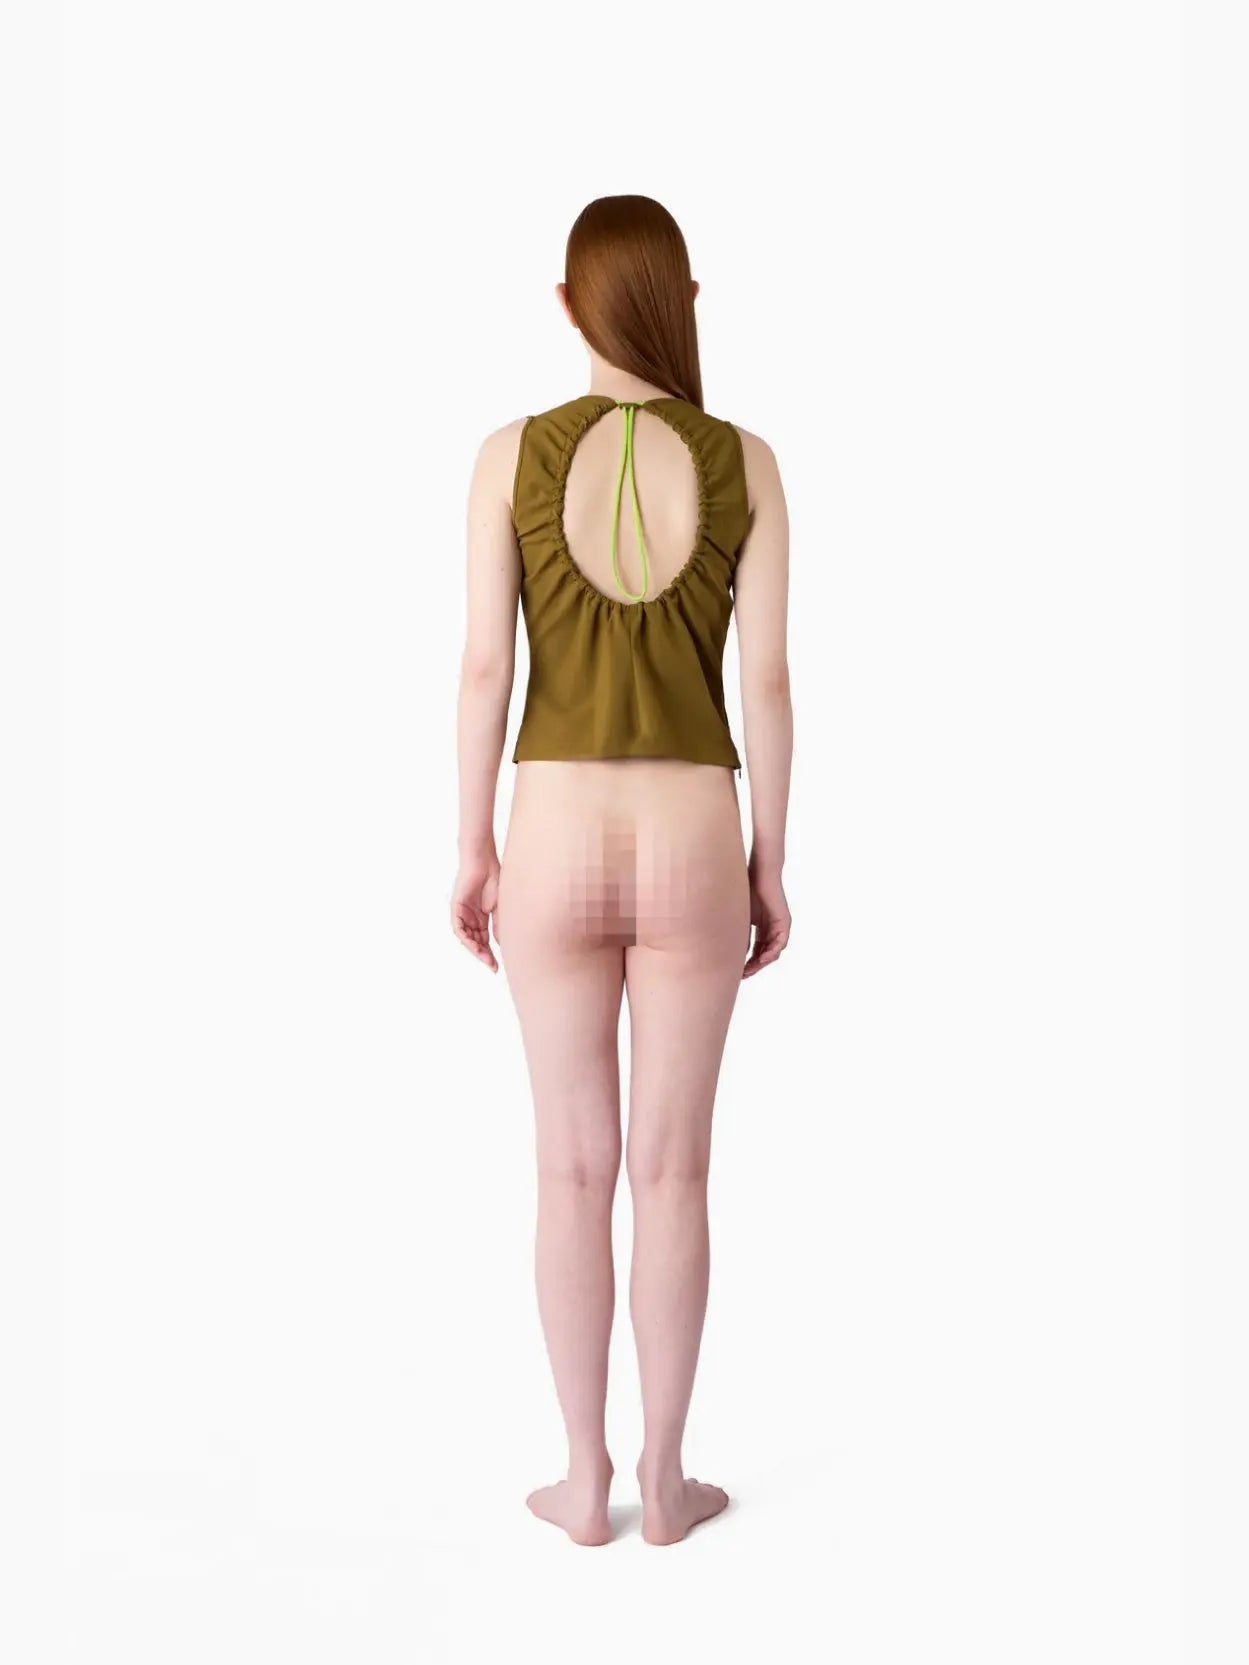 A sleeveless, olive green Buco Top Olive Green by Sunnei featuring a high neckline and a unique cut-out design at the back with a tie closure. The smooth, fitted fabric ensures a sleek silhouette. Laid flat on a white background, this chic piece is available exclusively at our Barcelona boutique, BassaLStore.